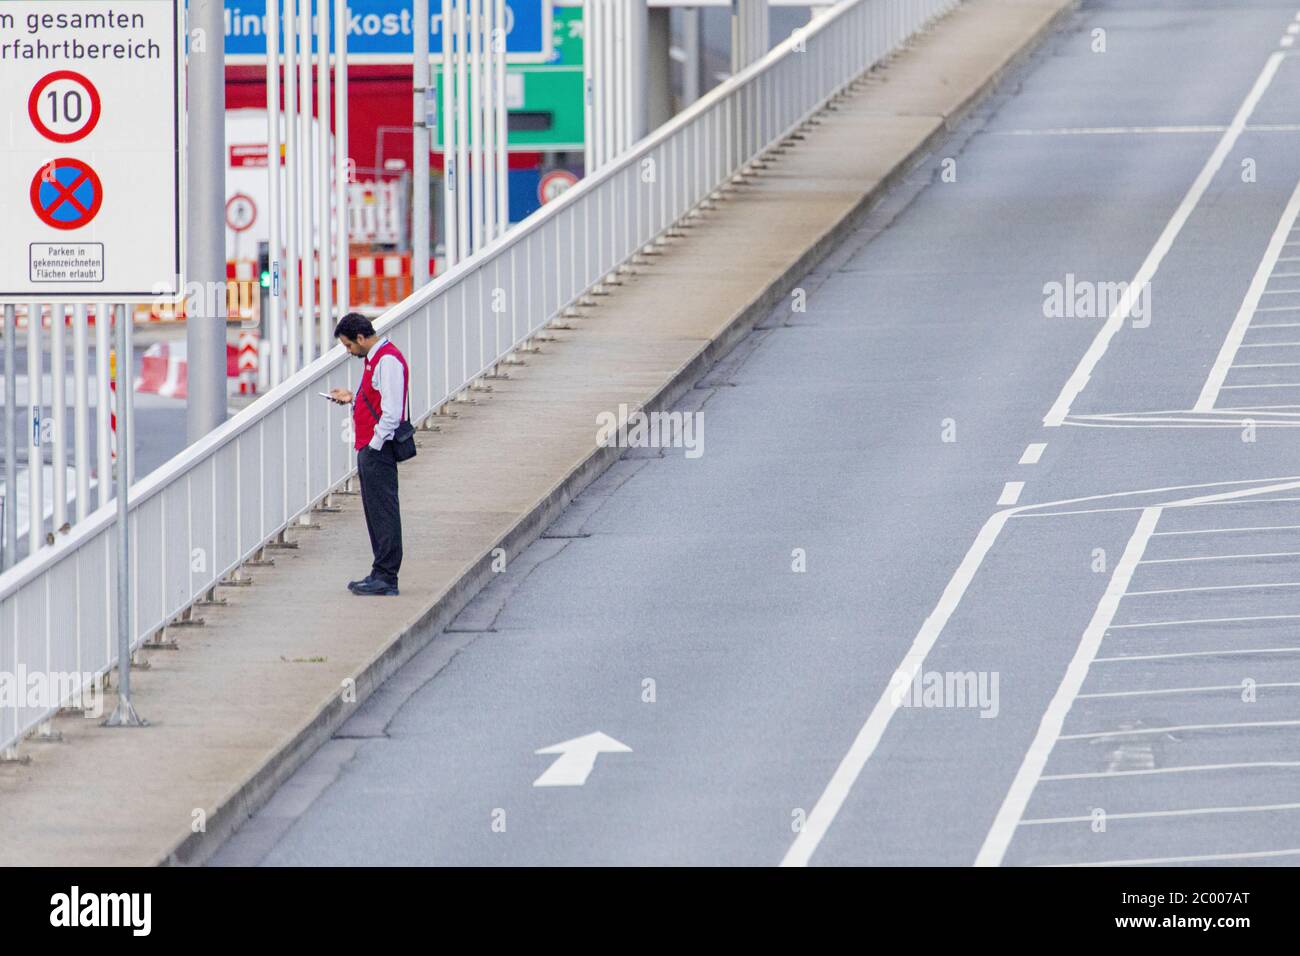 An airport worker outside the nearly empty Frankfurt Airport during the lockdown caused by the COVID-19 virus. Worldwide, the air traffic industry is heavily impacted by the massive drop in traffic. Stock Photo